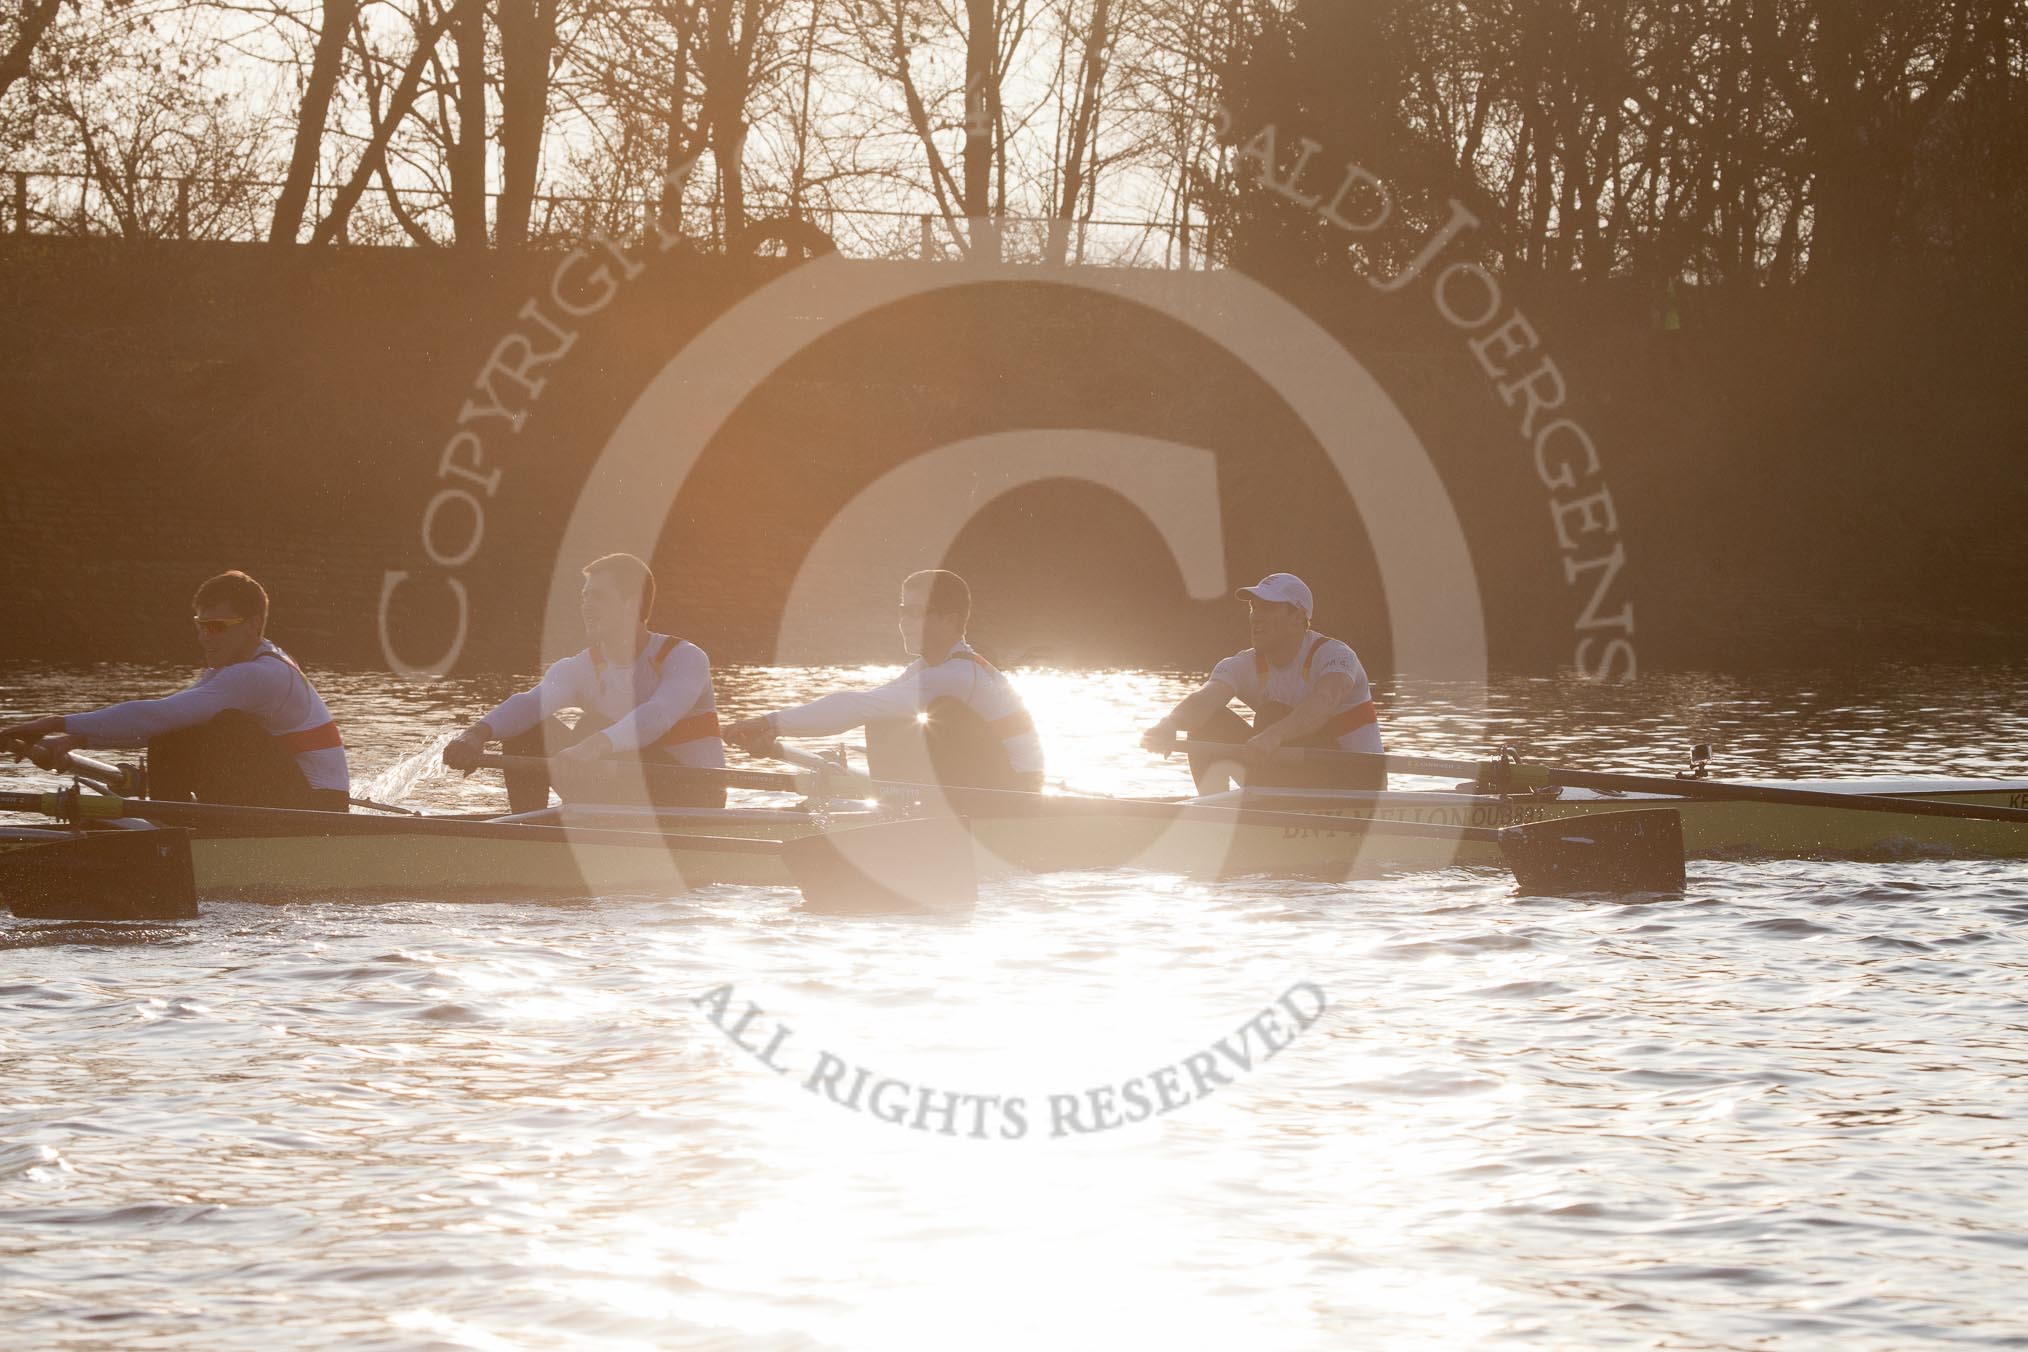 The Boat Race season 2014 - fixture OUBC vs German U23: The German U23-boat near St Paul's School, shot against the low evening sun..
River Thames between Putney Bridge and Chiswick Bridge,



on 08 March 2014 at 16:53, image #119